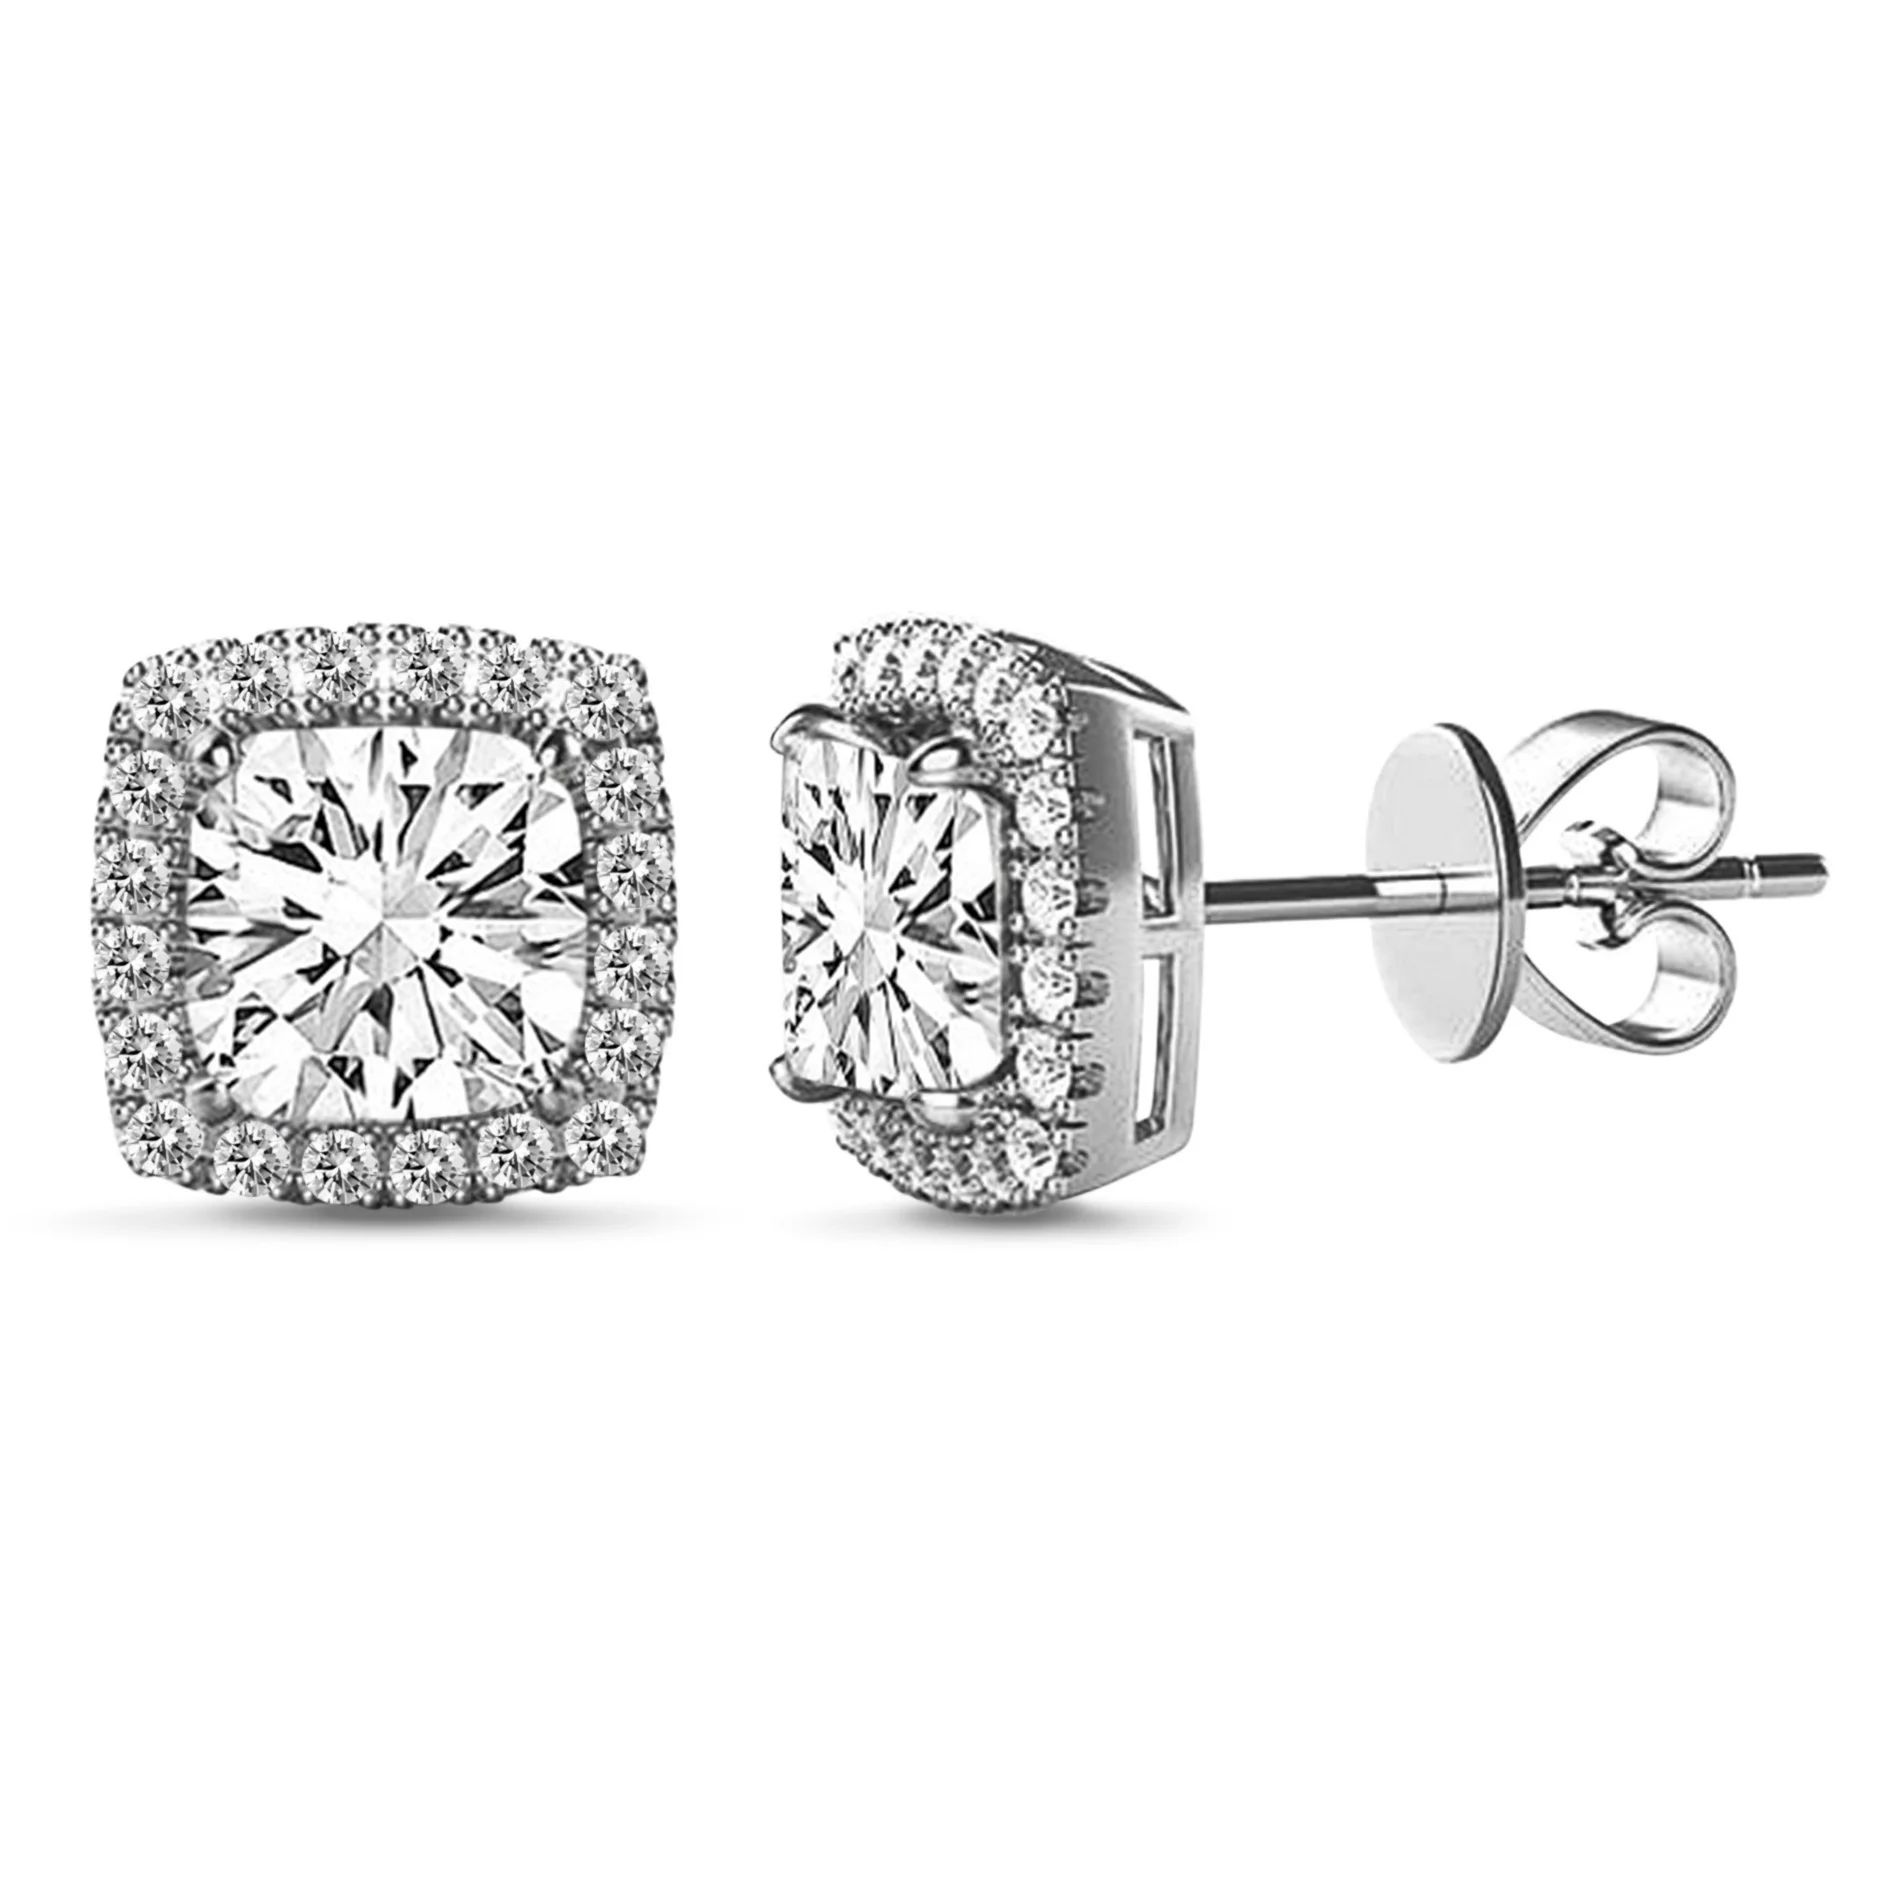 Lesa Michele Halo Cubic Zirconia Square Earrings in Rhodium Plated Sterling Silver for Women - Wa... | Walmart (US)